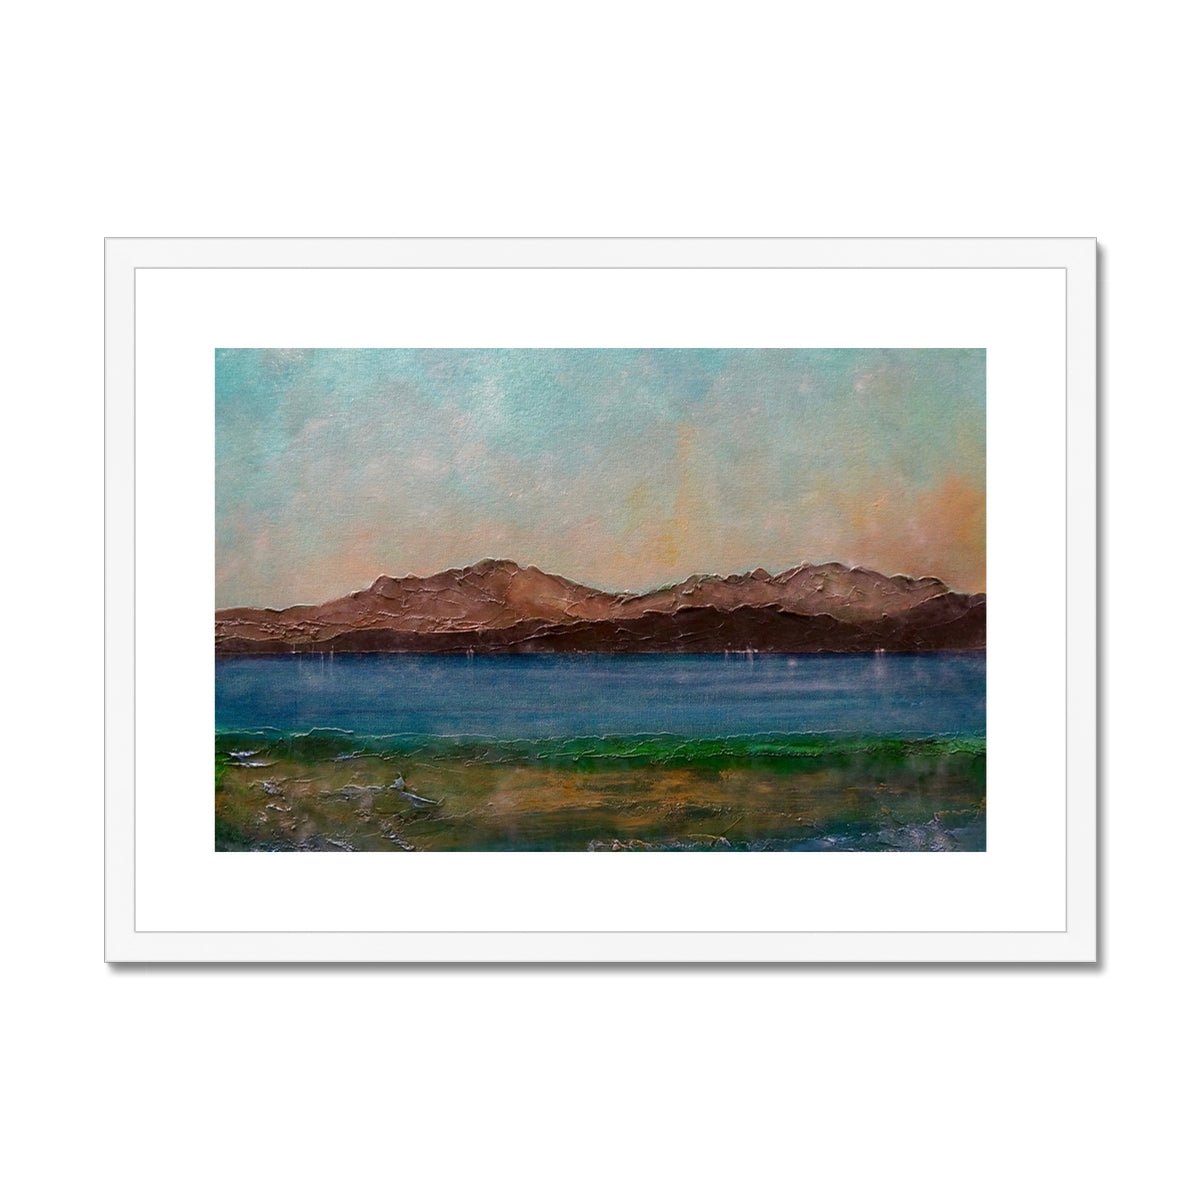 Arran From Scalpsie Bay Painting | Framed & Mounted Prints From Scotland-Framed & Mounted Prints-Arran Art Gallery-A2 Landscape-White Frame-Paintings, Prints, Homeware, Art Gifts From Scotland By Scottish Artist Kevin Hunter